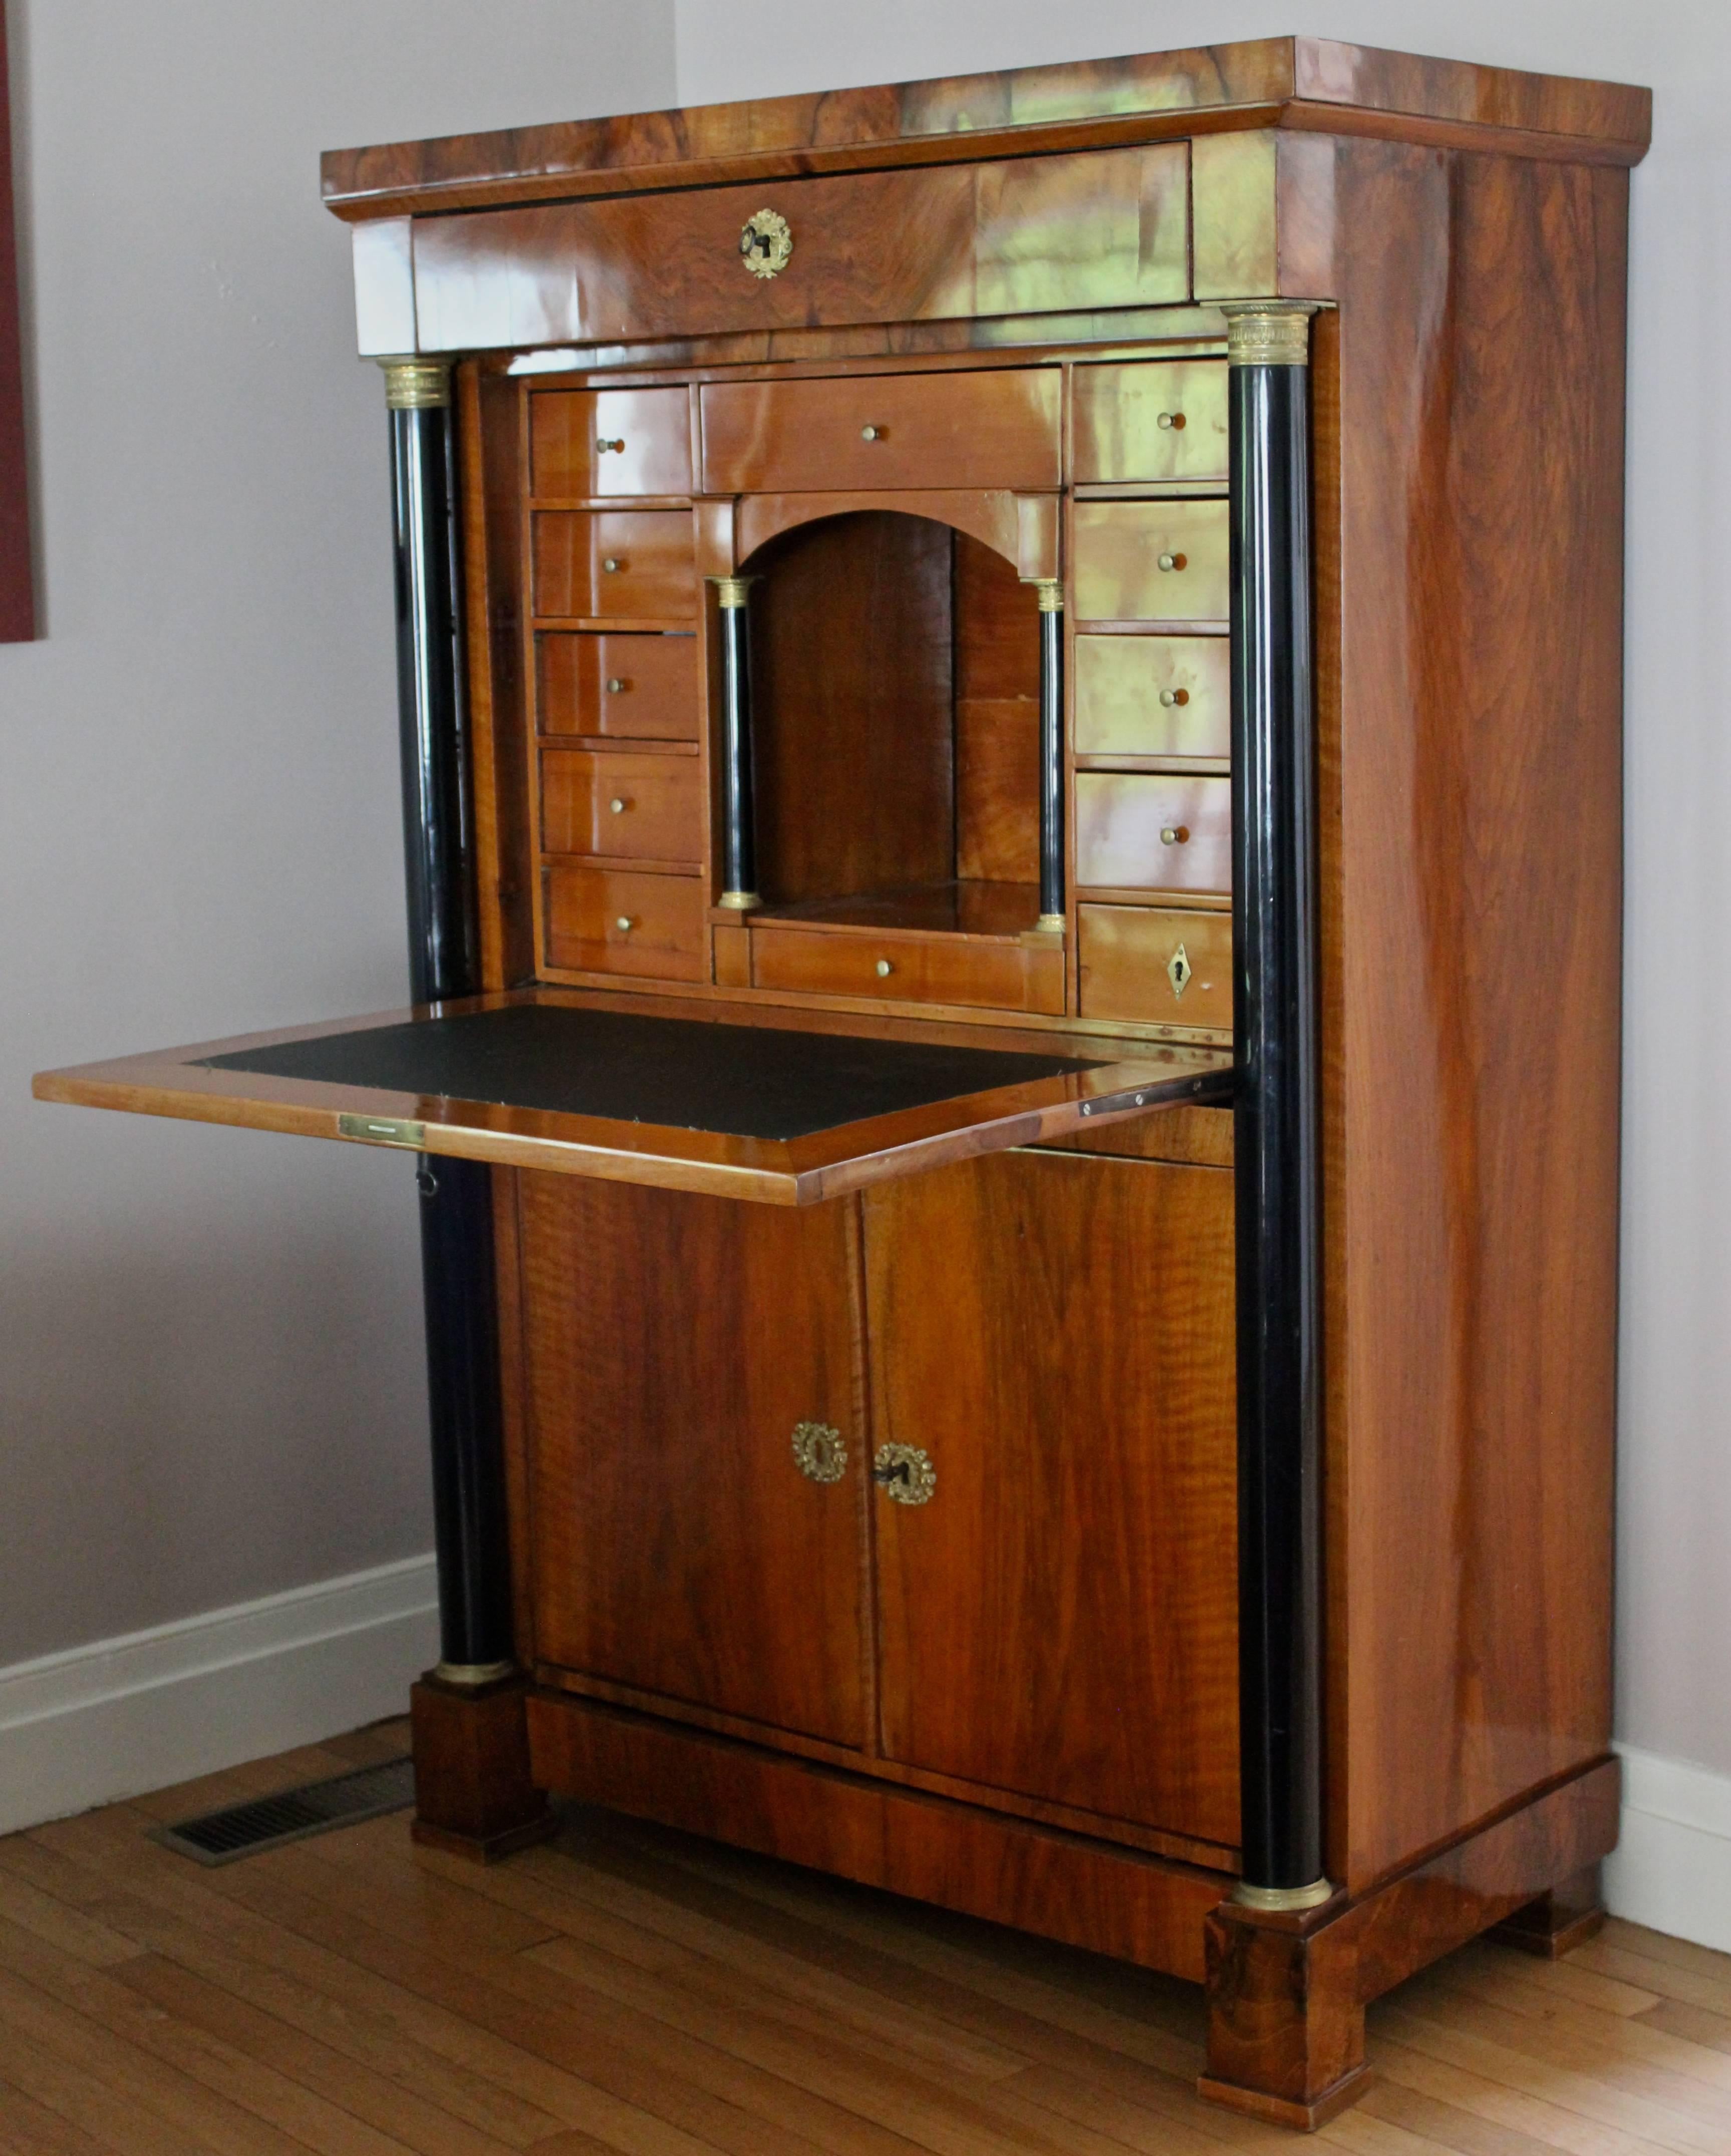 Secretaire a abattant, Germany 1820, Biedermeier period. The outside with fall front and two doors flanked by two ebonized columns shows a beautiful walnut veneer mirrored design. The cherry wood veneered inside opens  to a central compartment